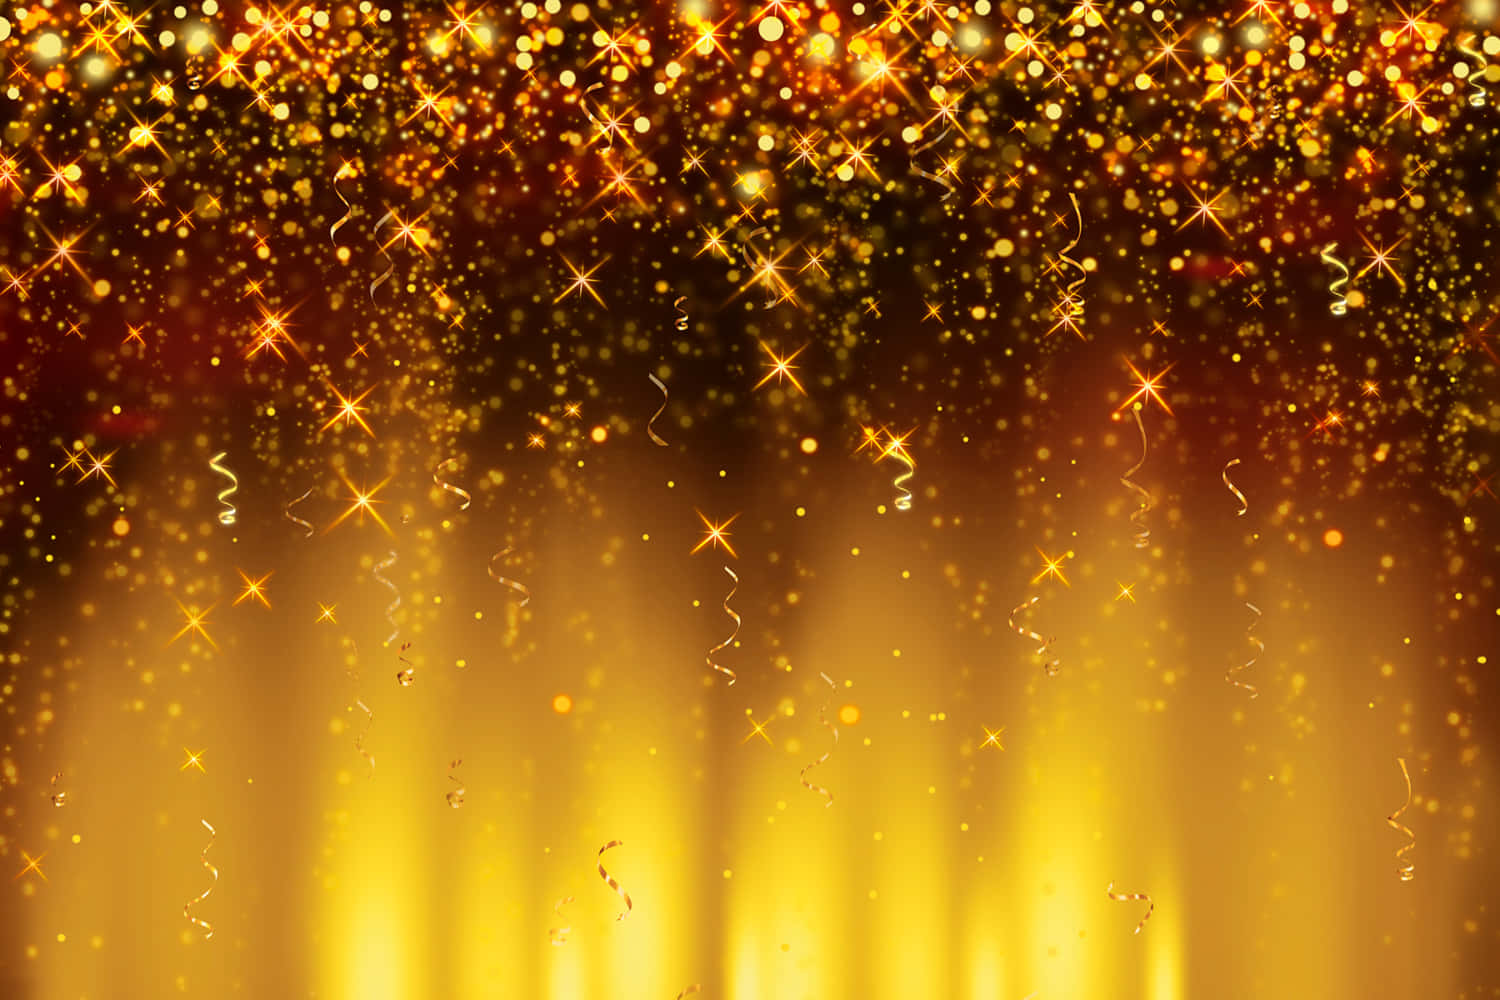 Golden Background With Stars And Lights